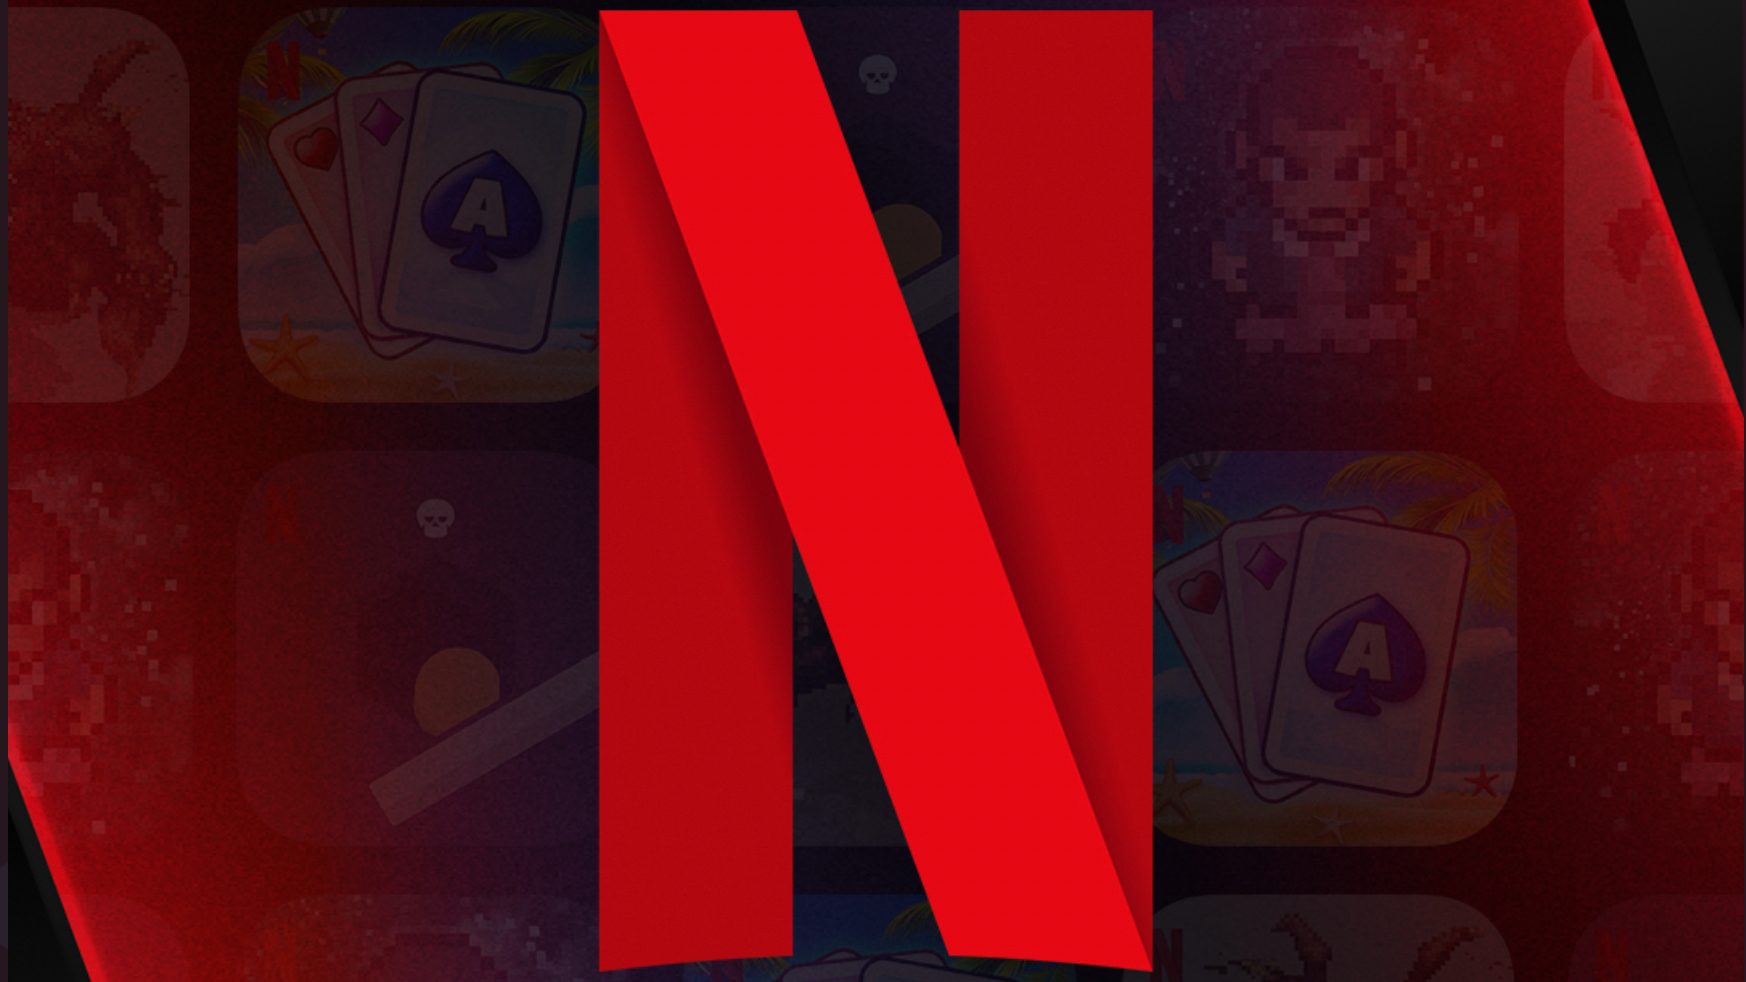 Netflix expands gaming service with hit shows